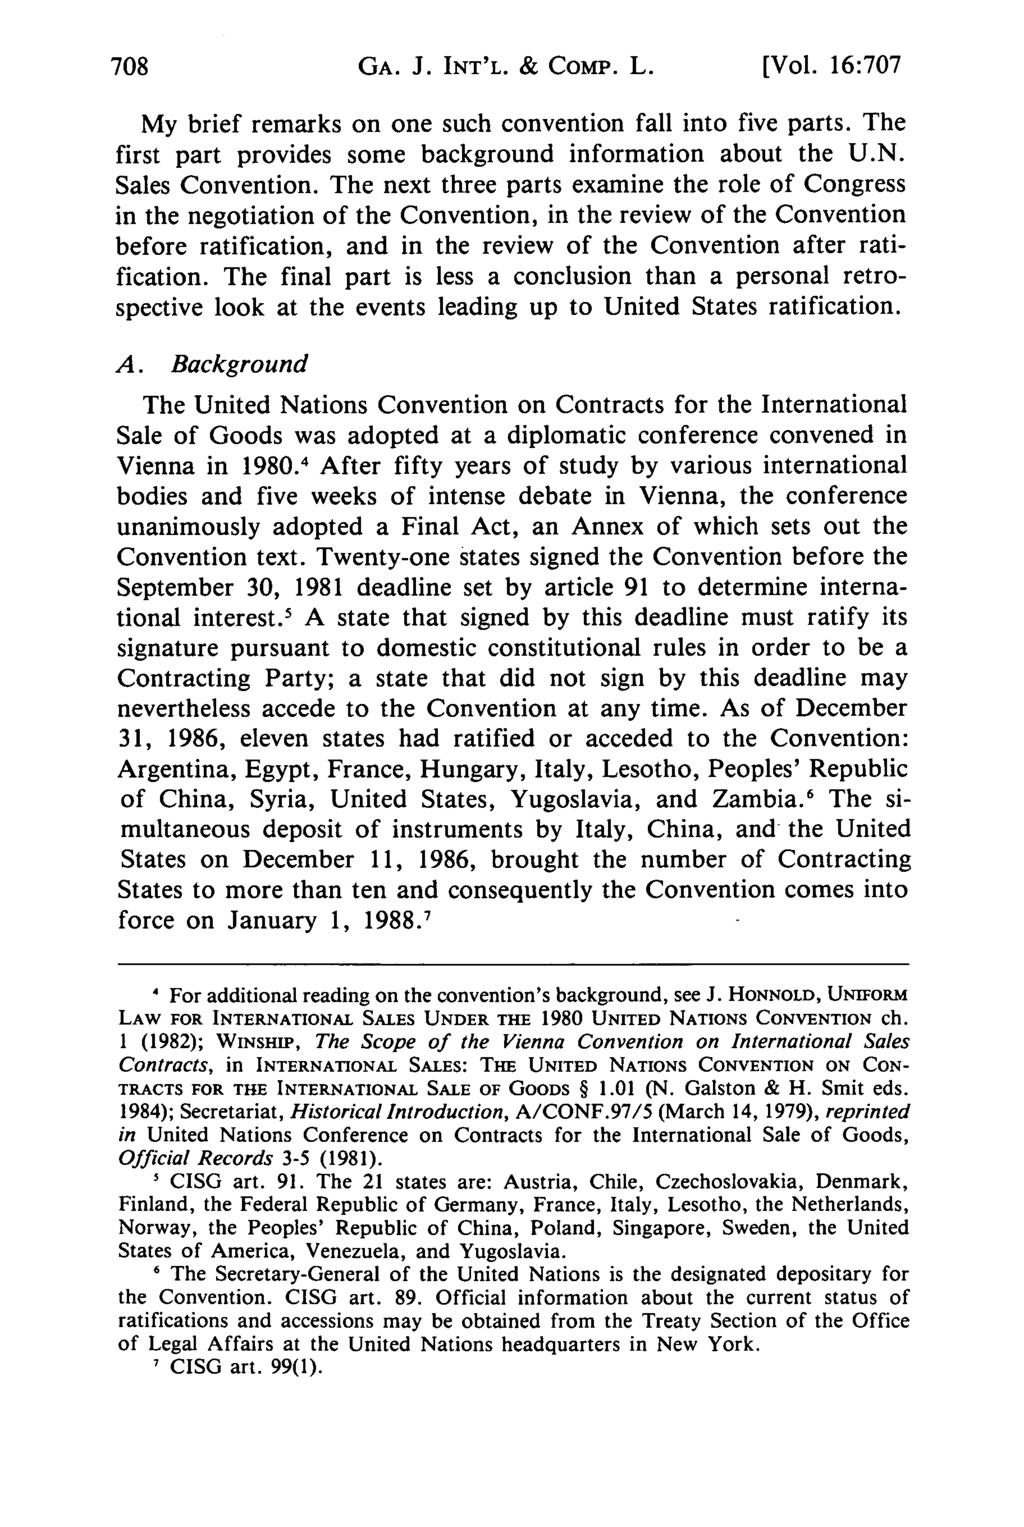 GA. J. INT'L. & CoMP. L. [Vol. 16:707 My brief remarks on one such convention fall into five parts. The first part provides some background information about the U.N. Sales Convention.